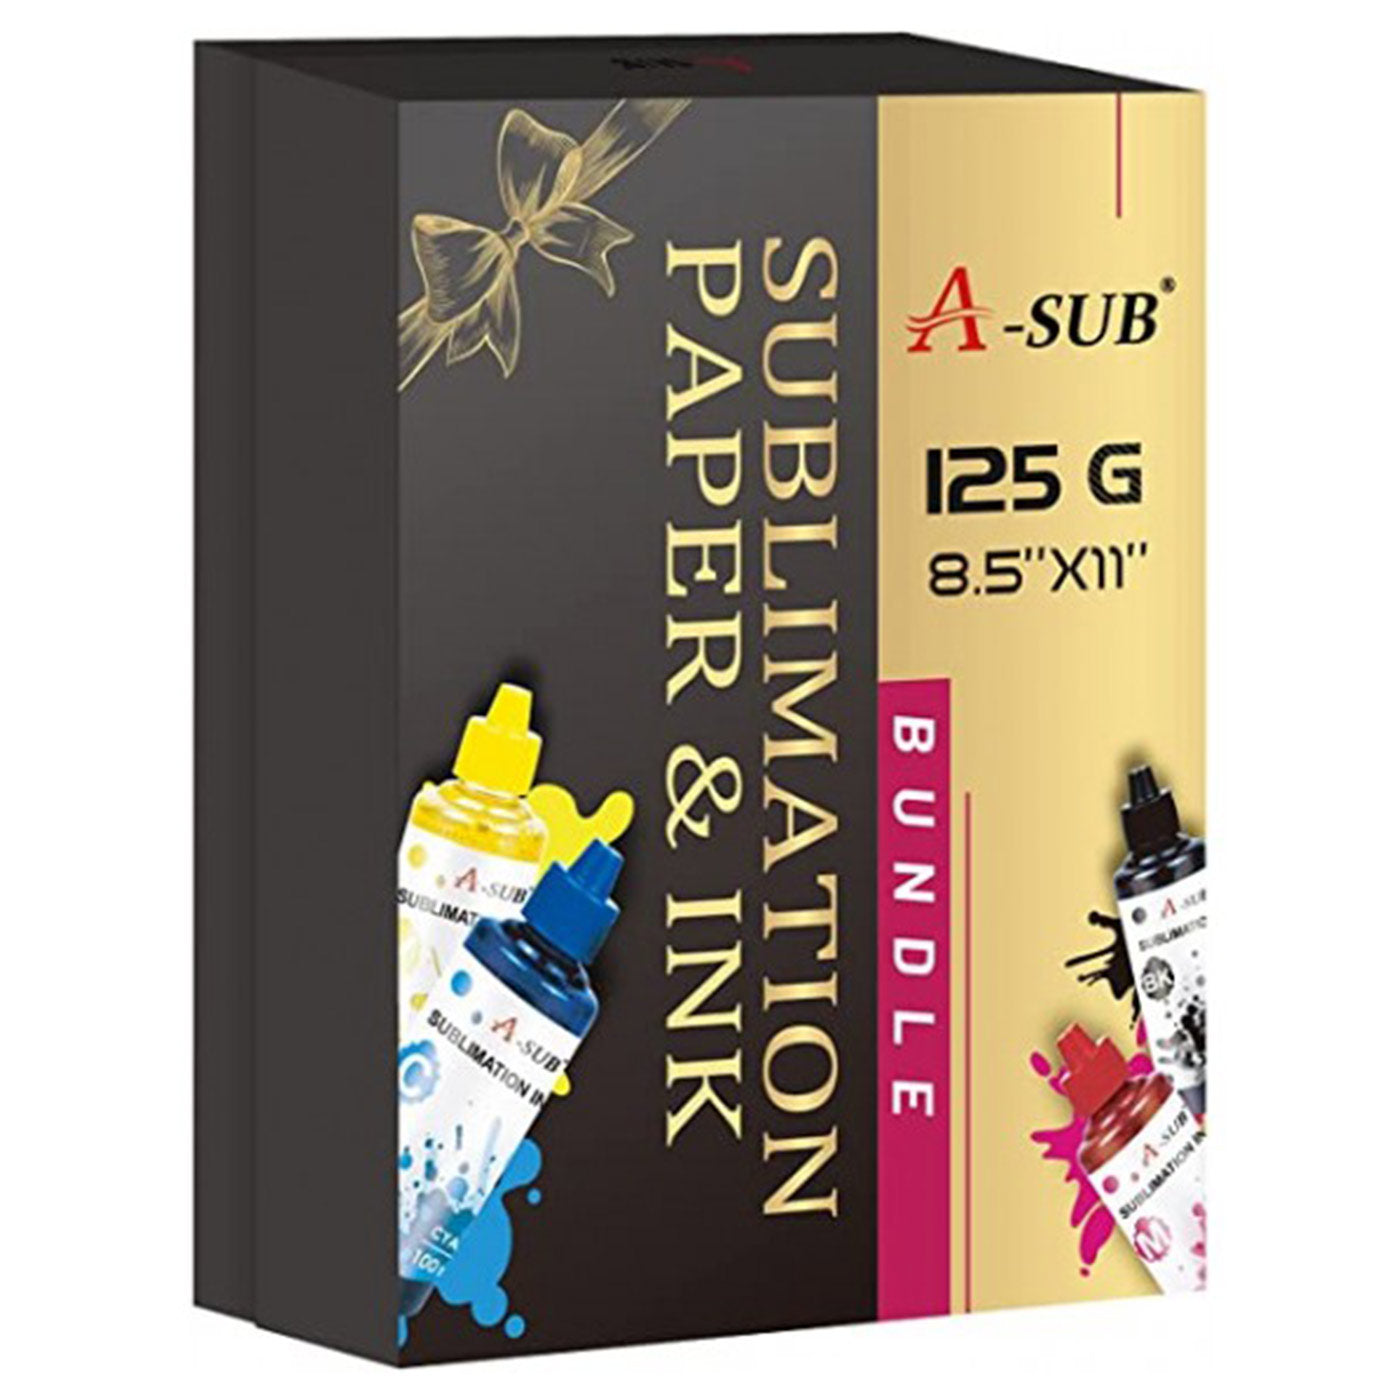 220 Sheets A-SUB Sublimation Paper 8.5X11 inch 125gsm，No Box